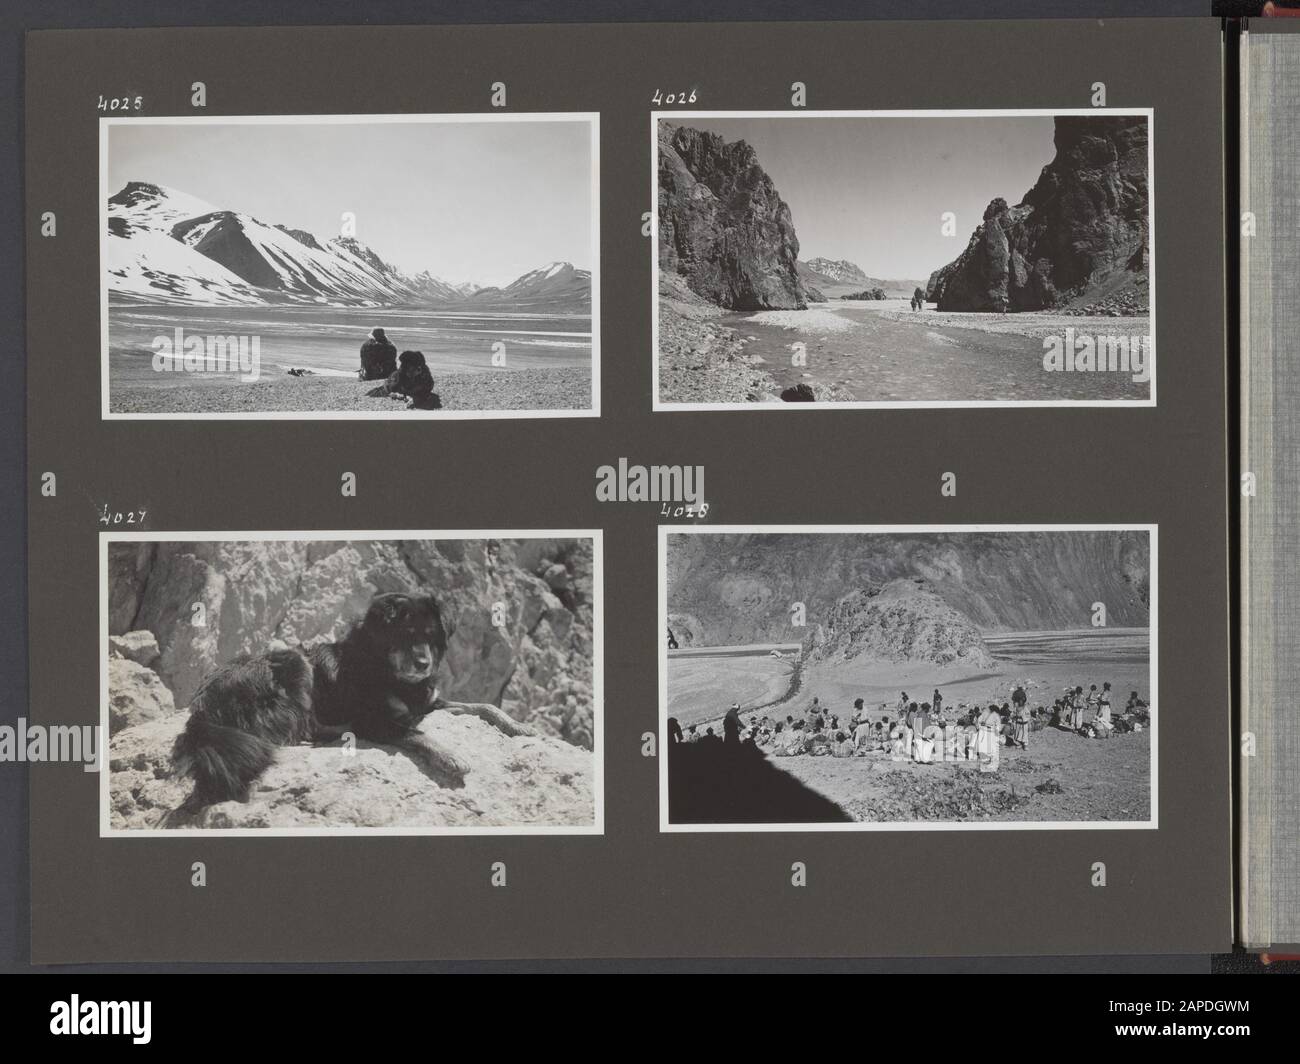 Photo Album Fisherman: Fourth Karakorum Expedition, 1935 Description: Album sheet with four photos. top left: View over the Depsang plateau. The dog Jesser, a Tibetan mastiff in the foreground. Top right: A gorge and river on the Depsang plateau. Bottom left: The dog Jesser, a Tibetan mastiff. Date: January 1, 1935 Location: China, Depsang plateau, India, Karakorum, Pakistan Keywords: dogs, campsites Stock Photo